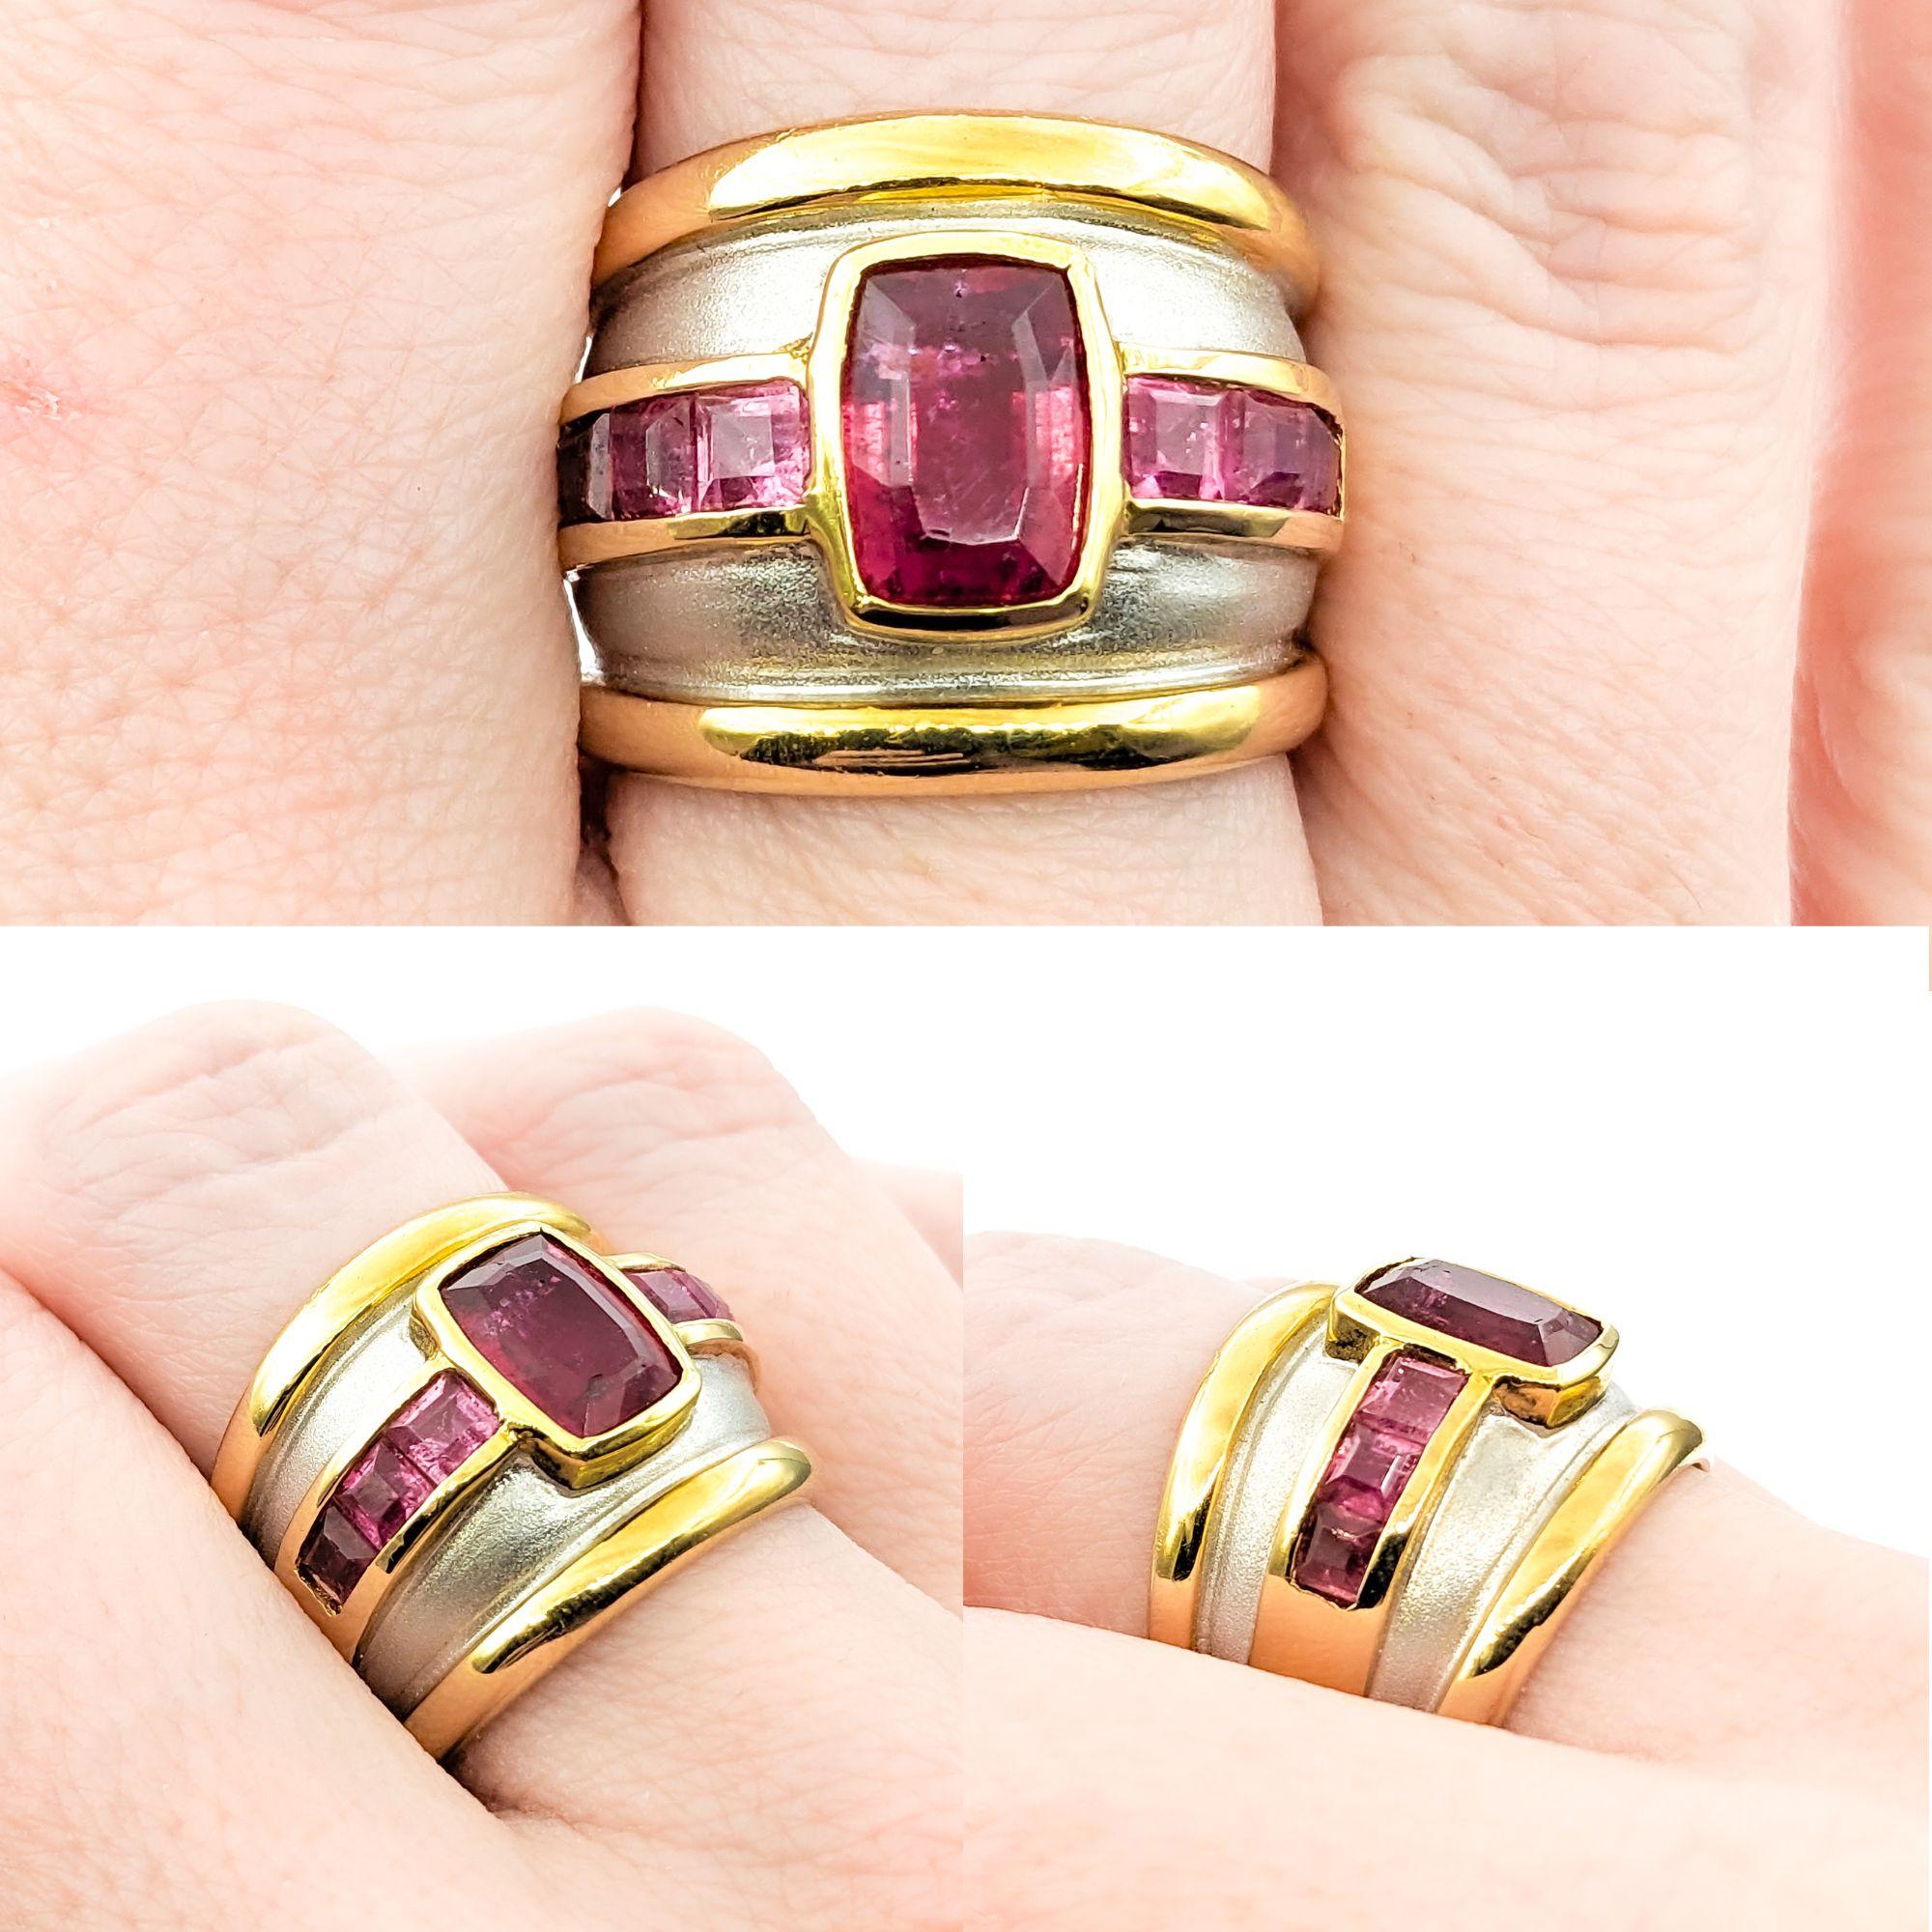 Pink Tourmaline & 14K Two Tone Gold Cocktail Ring

This impressive ring is crafted in 14kt white and yellow gold and features 2.85ct cushion and princess-cut pink tourmalines. This ring is size 7 1/2 but can be adjusted upon request (for a fee);